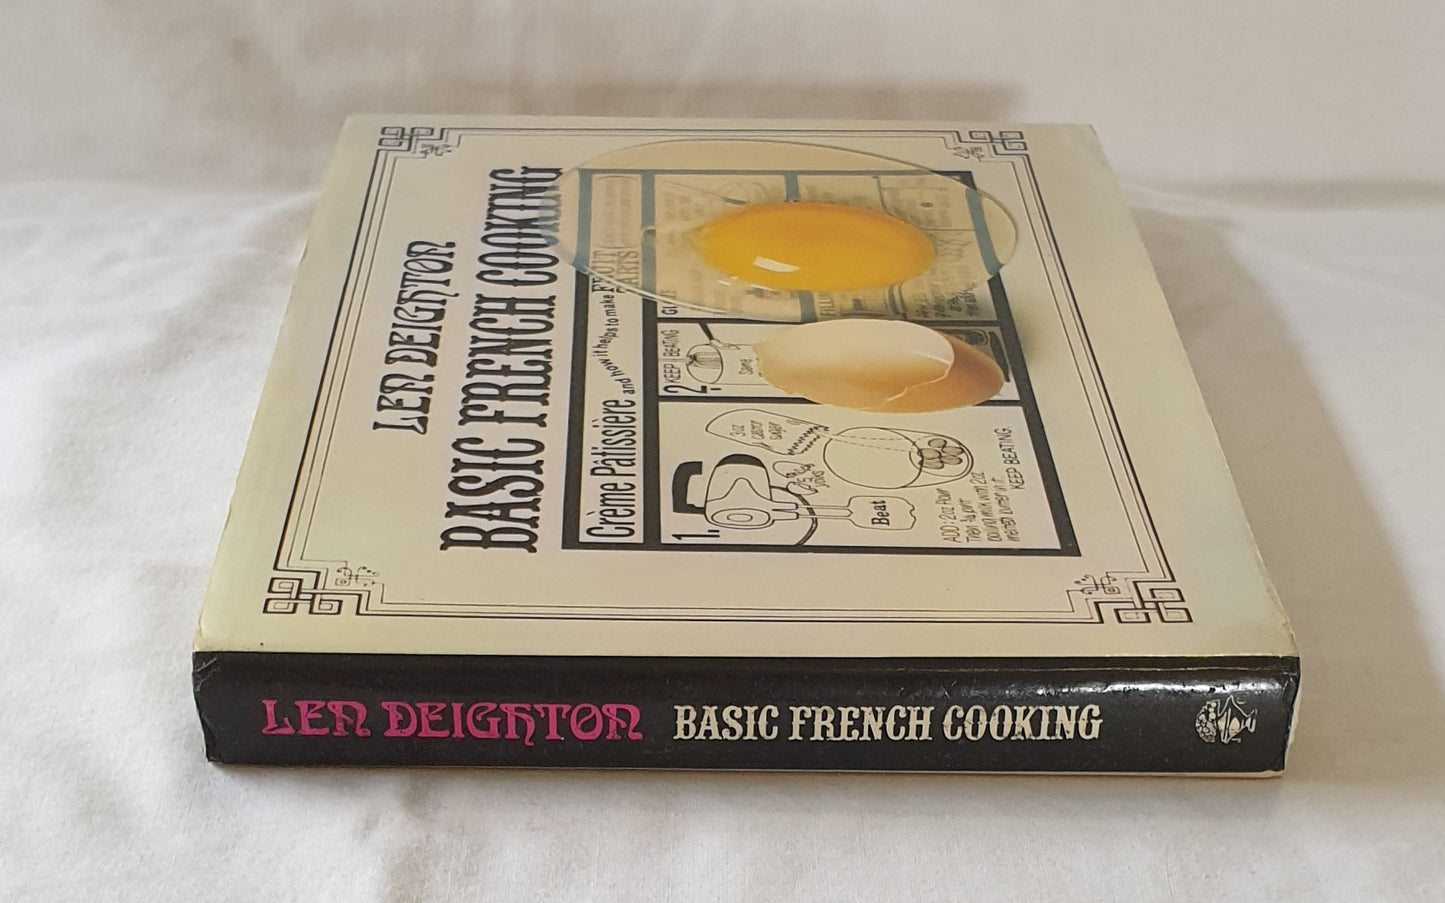 Basic French Cooking  by Len Deighton  Revised and enlarged from Ou est le garlic